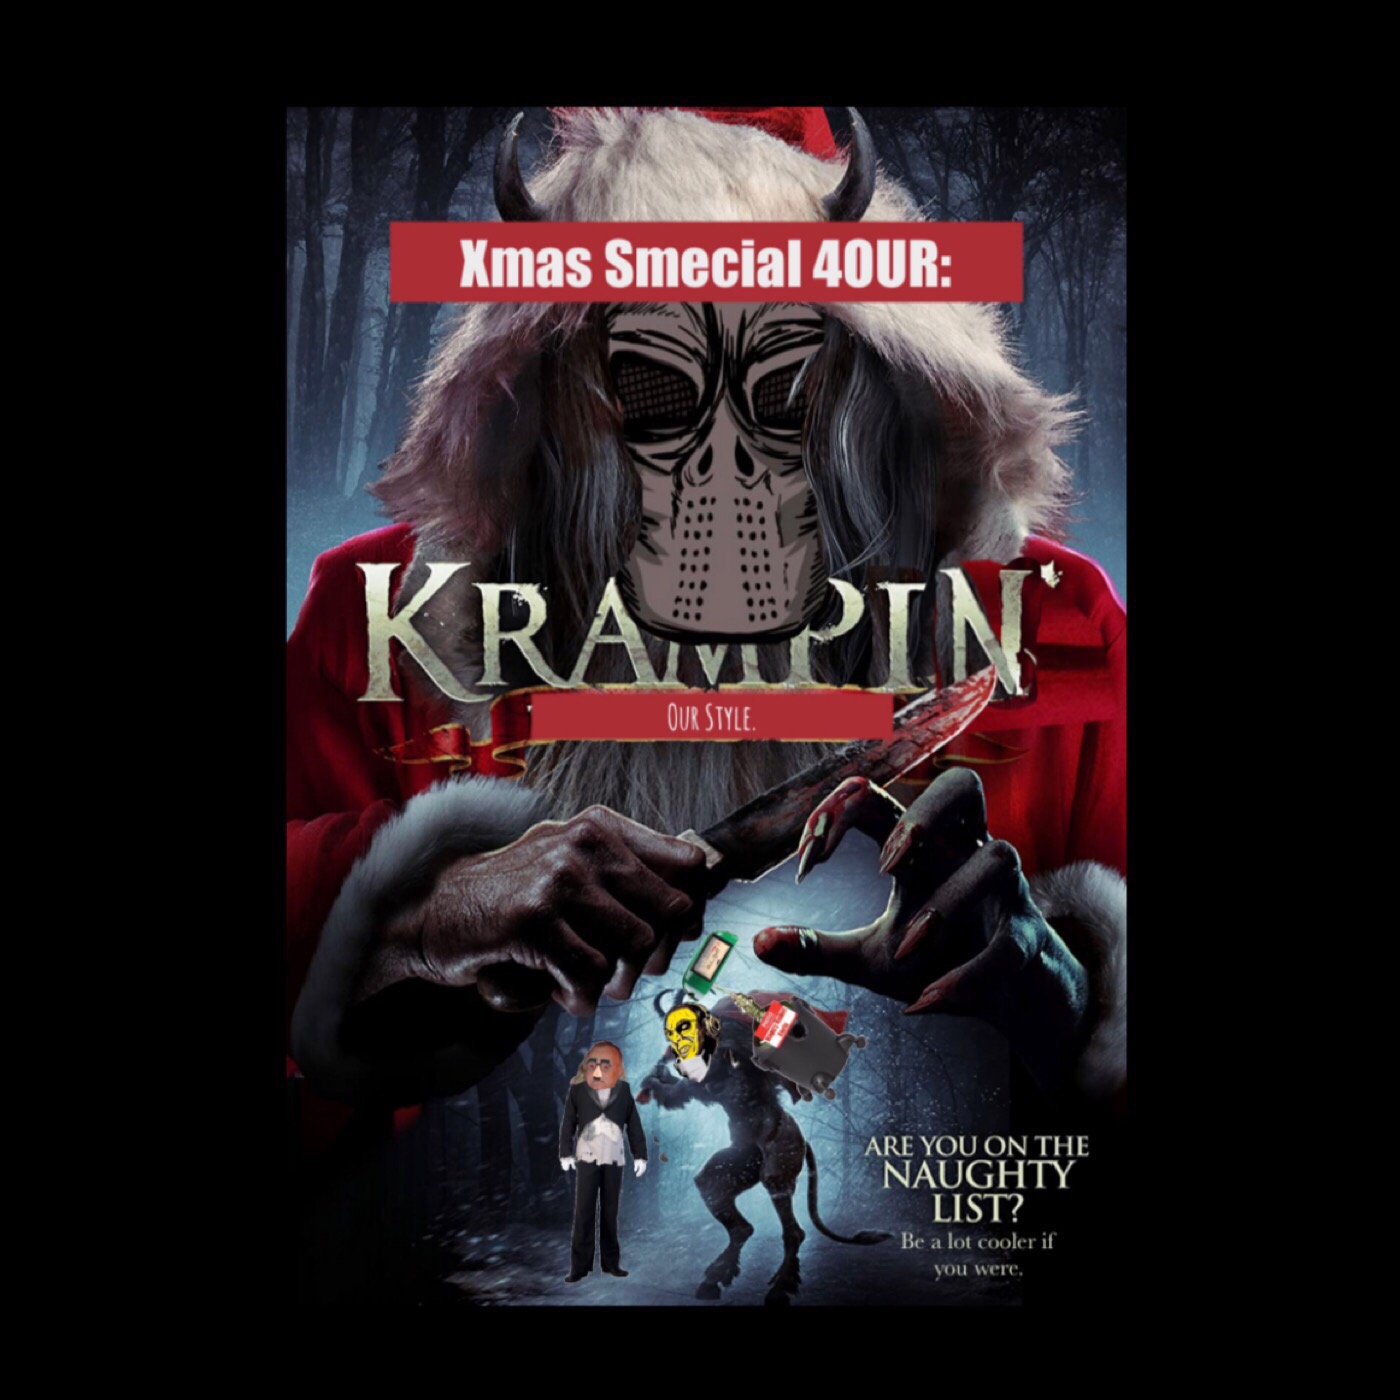 Xmas Smecial 4OUR: Krampin' our style